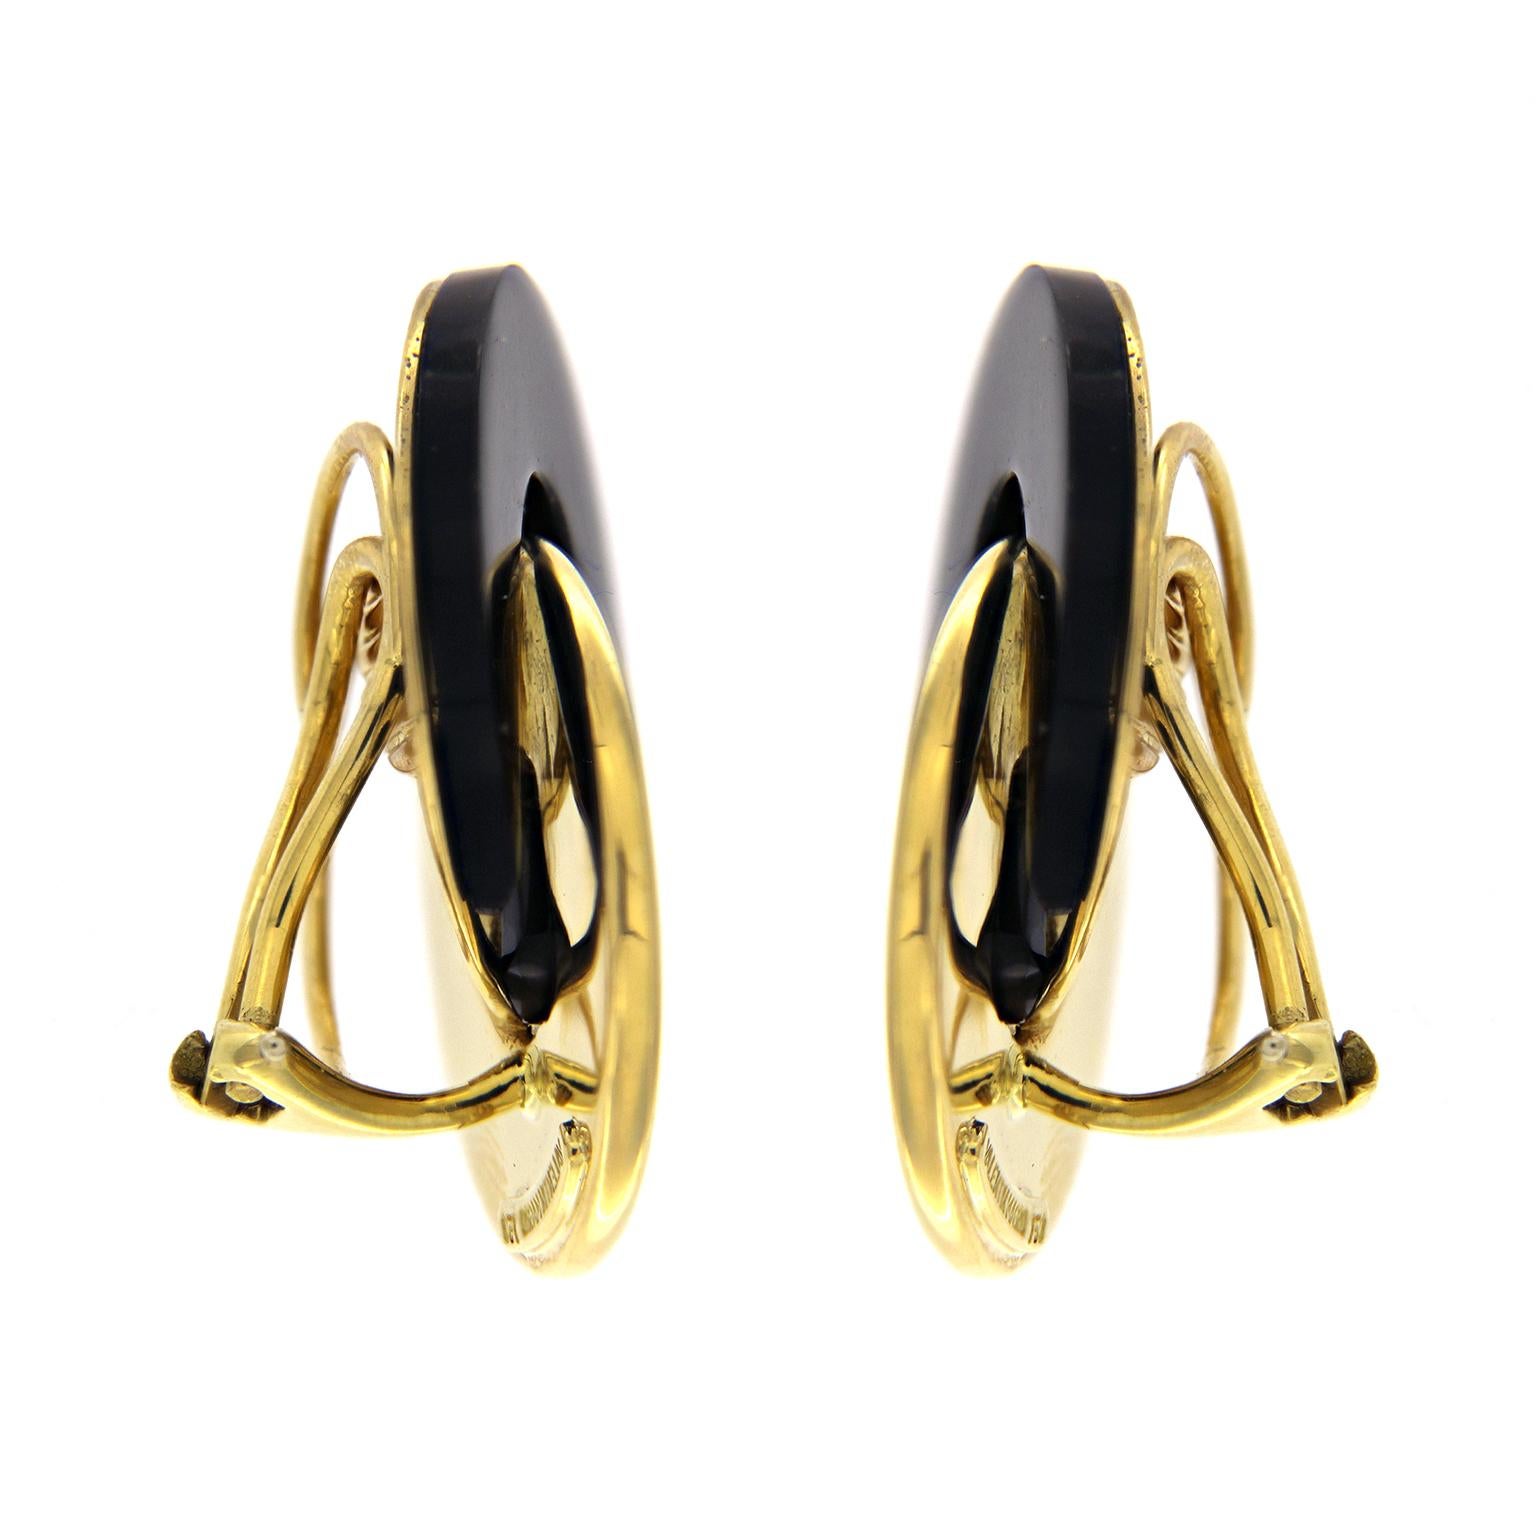 Valentin Magro Yellow Gold Diamond Black Jade Circle Earrings link close. Above is black jade shaped into a ring. It supports a brighter circle, with an inner row of round brilliant cut diamonds. Borders of 18k yellow gold edge the fiery jewels.